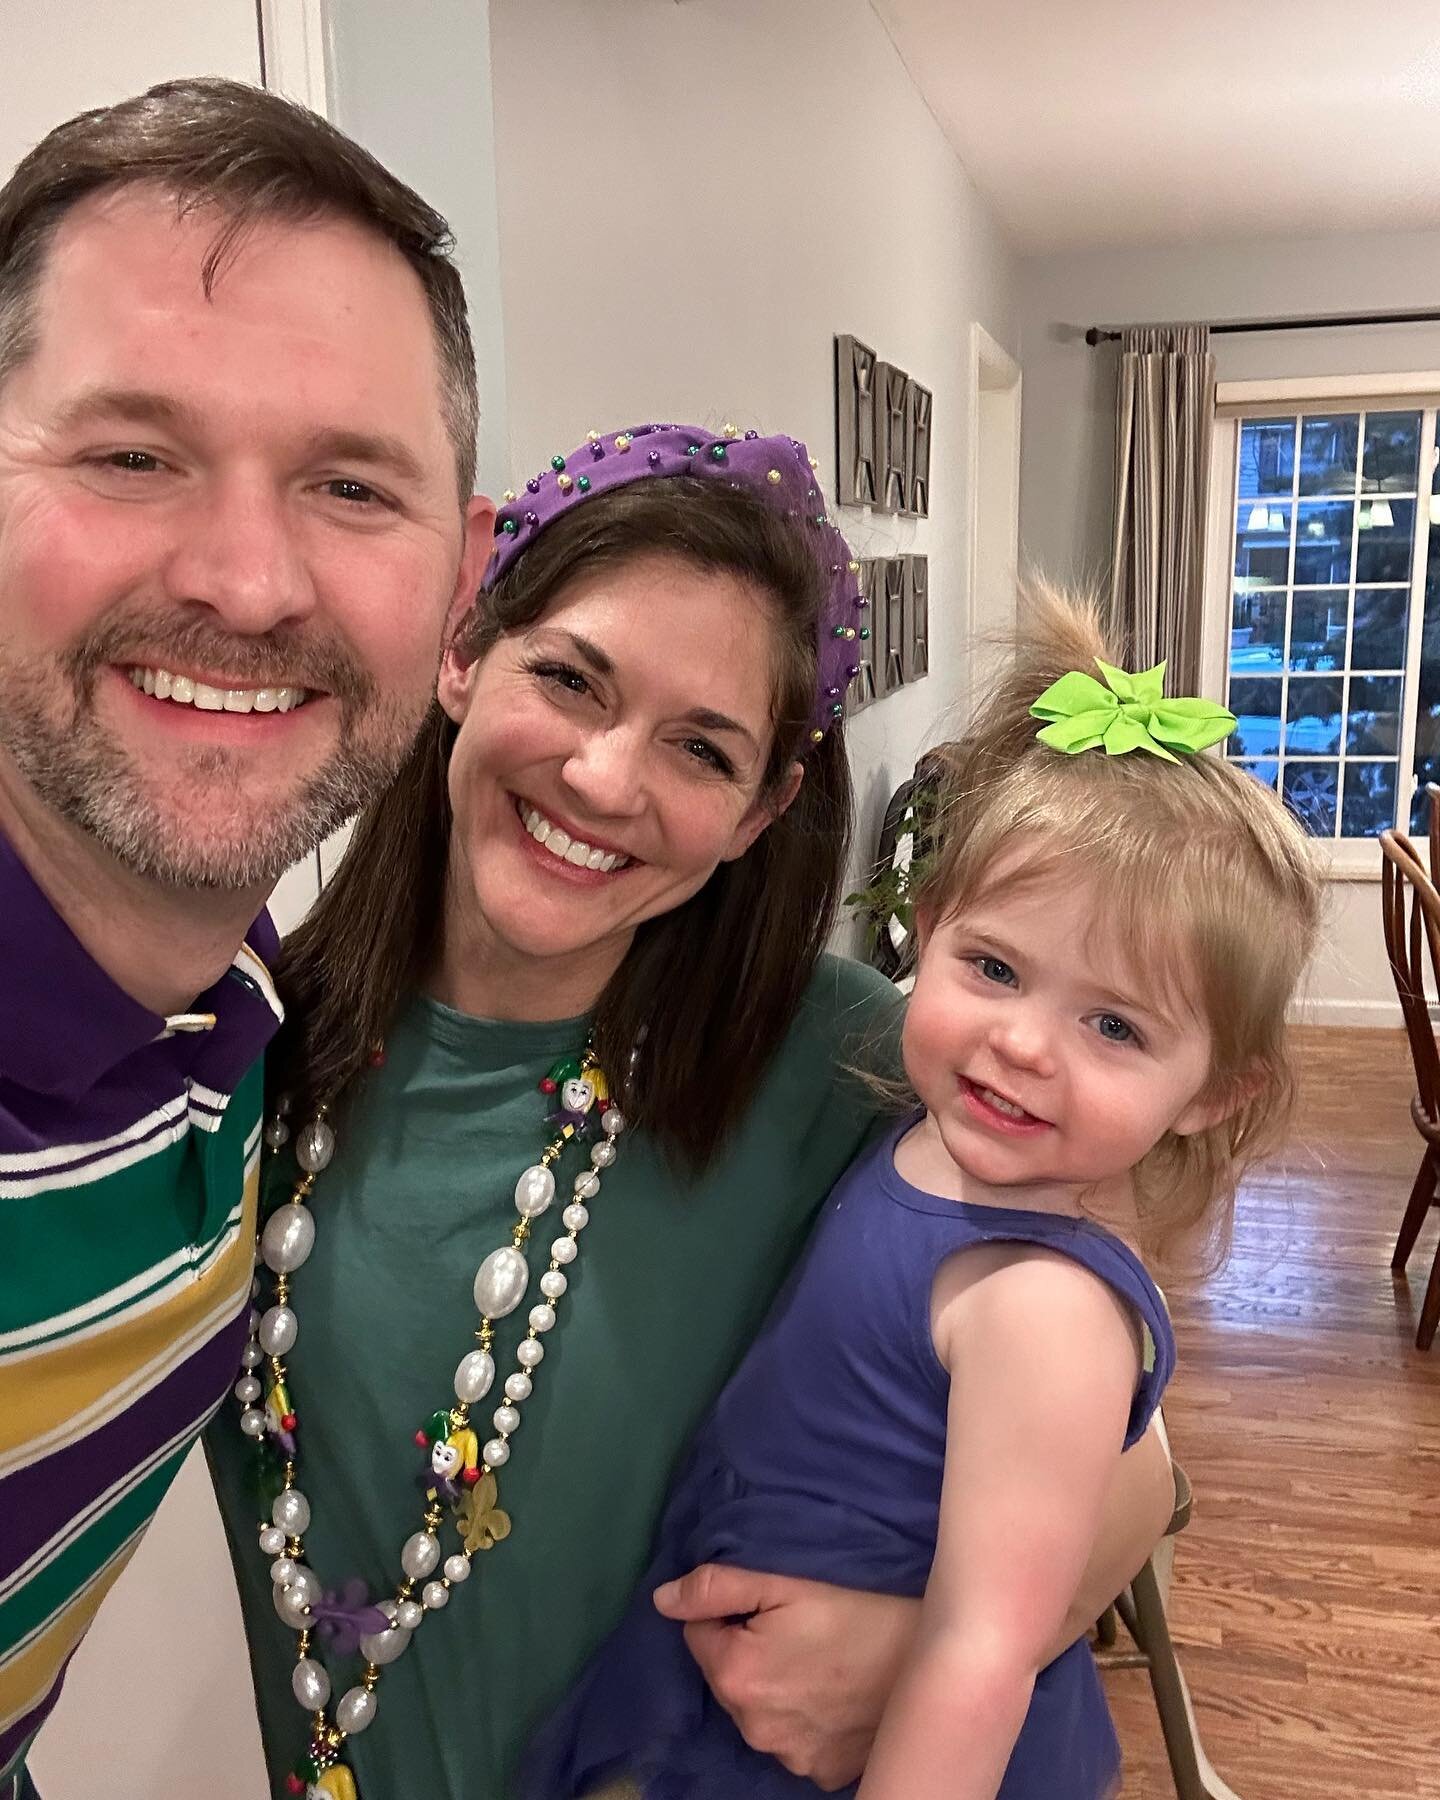 No other day makes me more homesick than Mardi Gras. Thanks fully @cathybueche makes sure we have king cake and the right outfits.

Tonight our friends invited us over for dinner and asked me to give a presentation on the history for Mardi Gras. It w